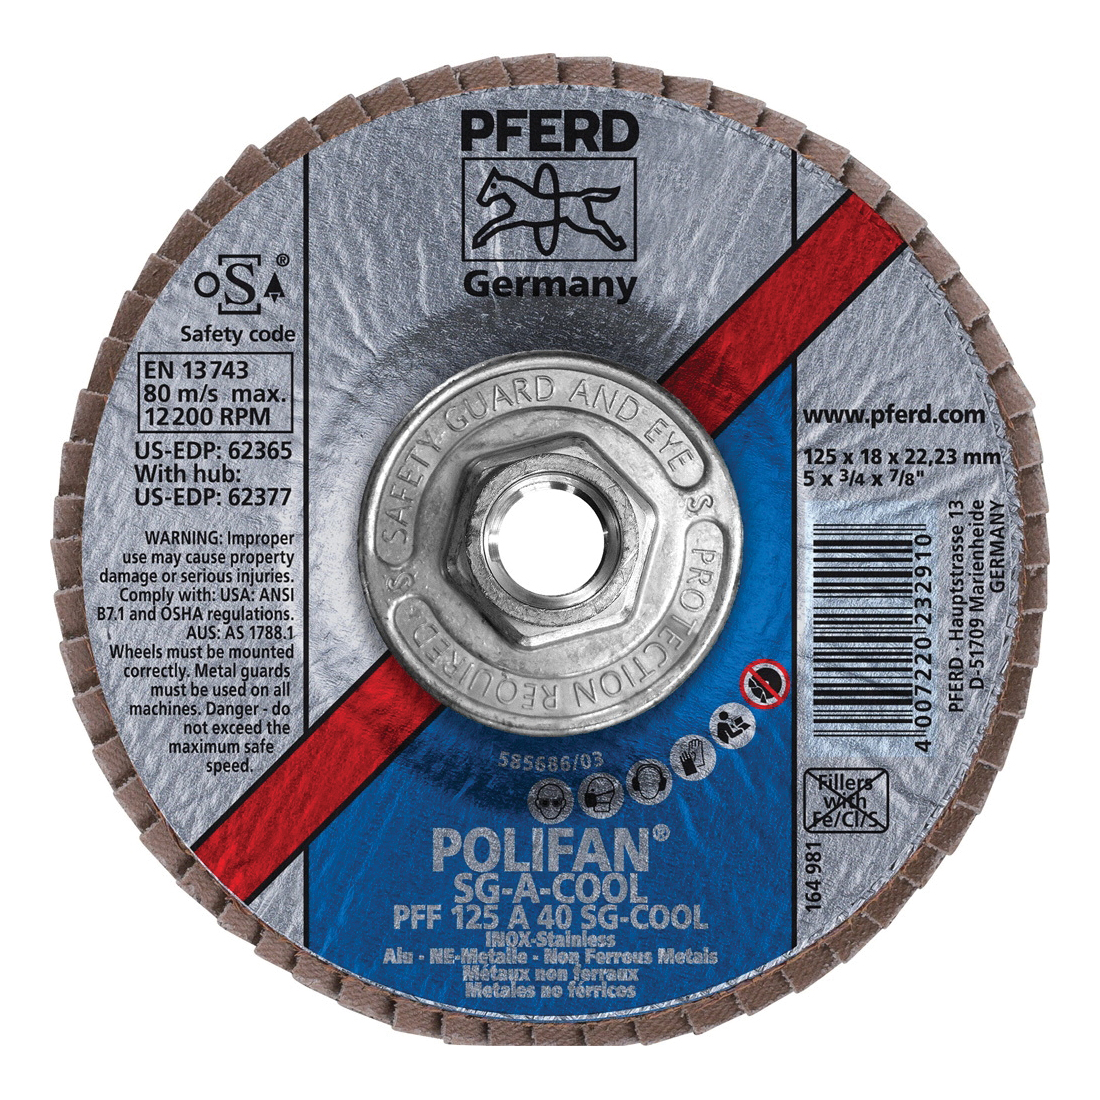 PFERD Polifan® 62377 Performance Line SG A-COOL Threaded Coated Abrasive Flap Disc, 5 in Dia, 40 Grit, Aluminum Oxide Abrasive, Type 27 Flat Disc